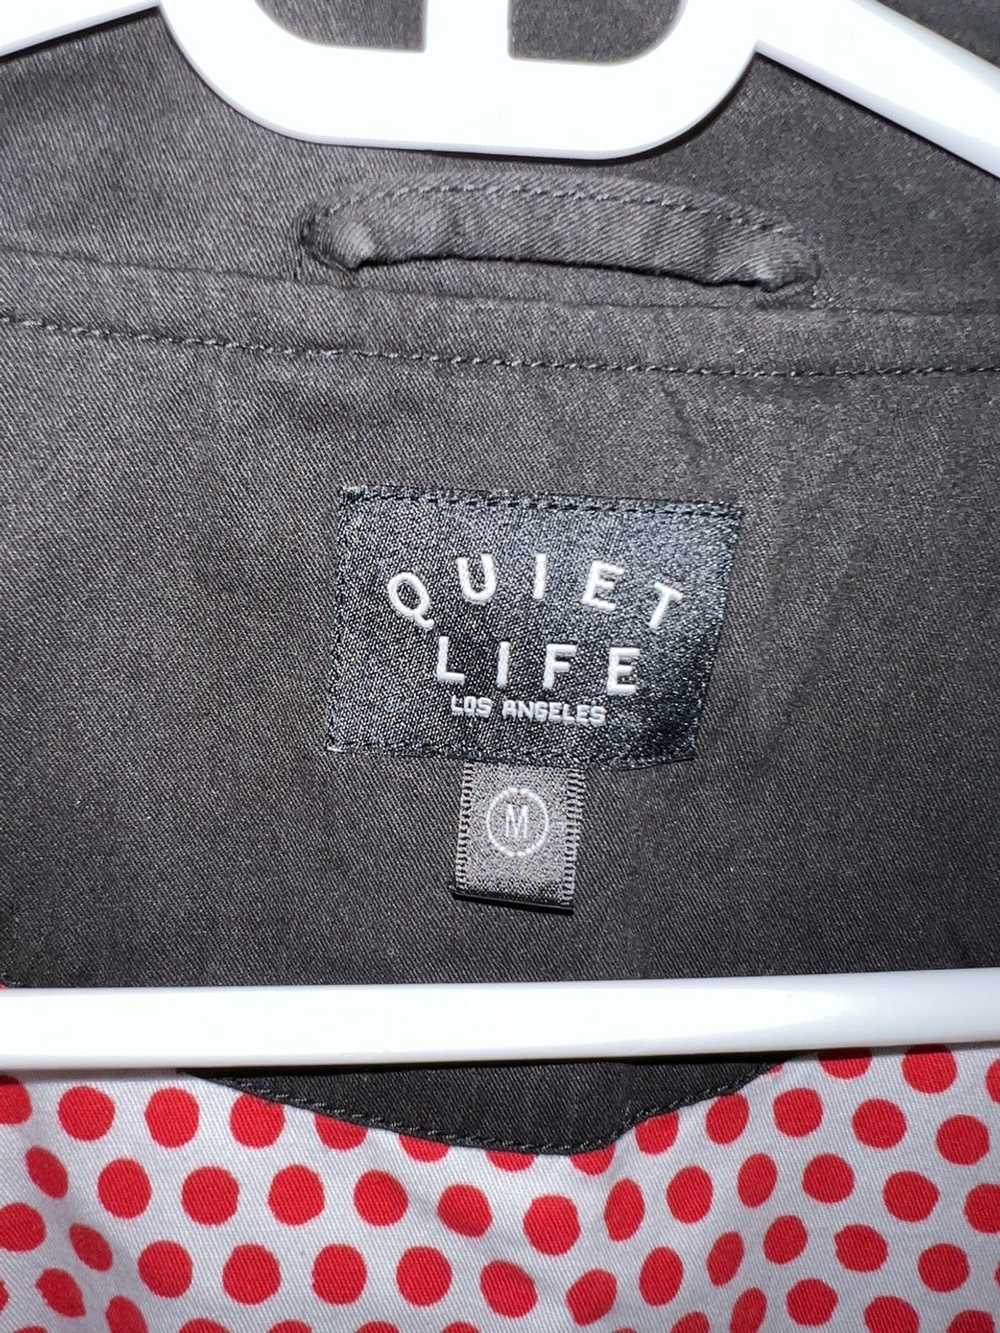 Streetwear × The Quiet Life The Quiet Life Polka … - image 3